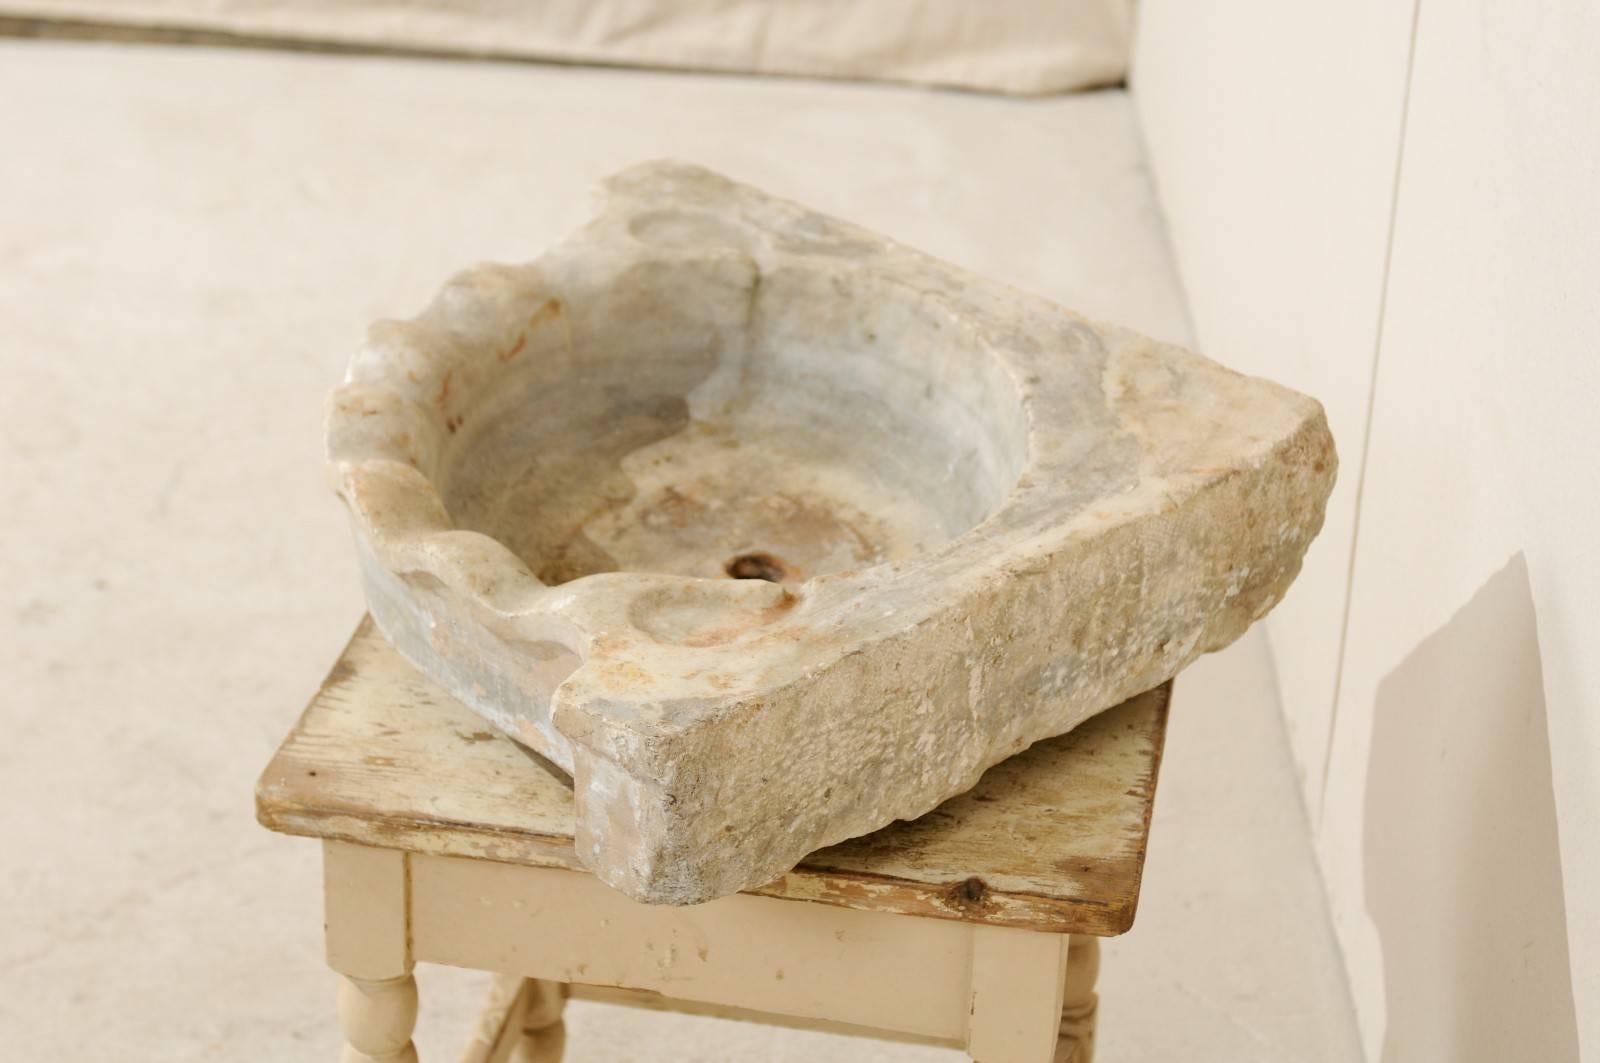 Carved 19th Century European Marble Corner Sink with Stylized Sea Shell Shape in Front